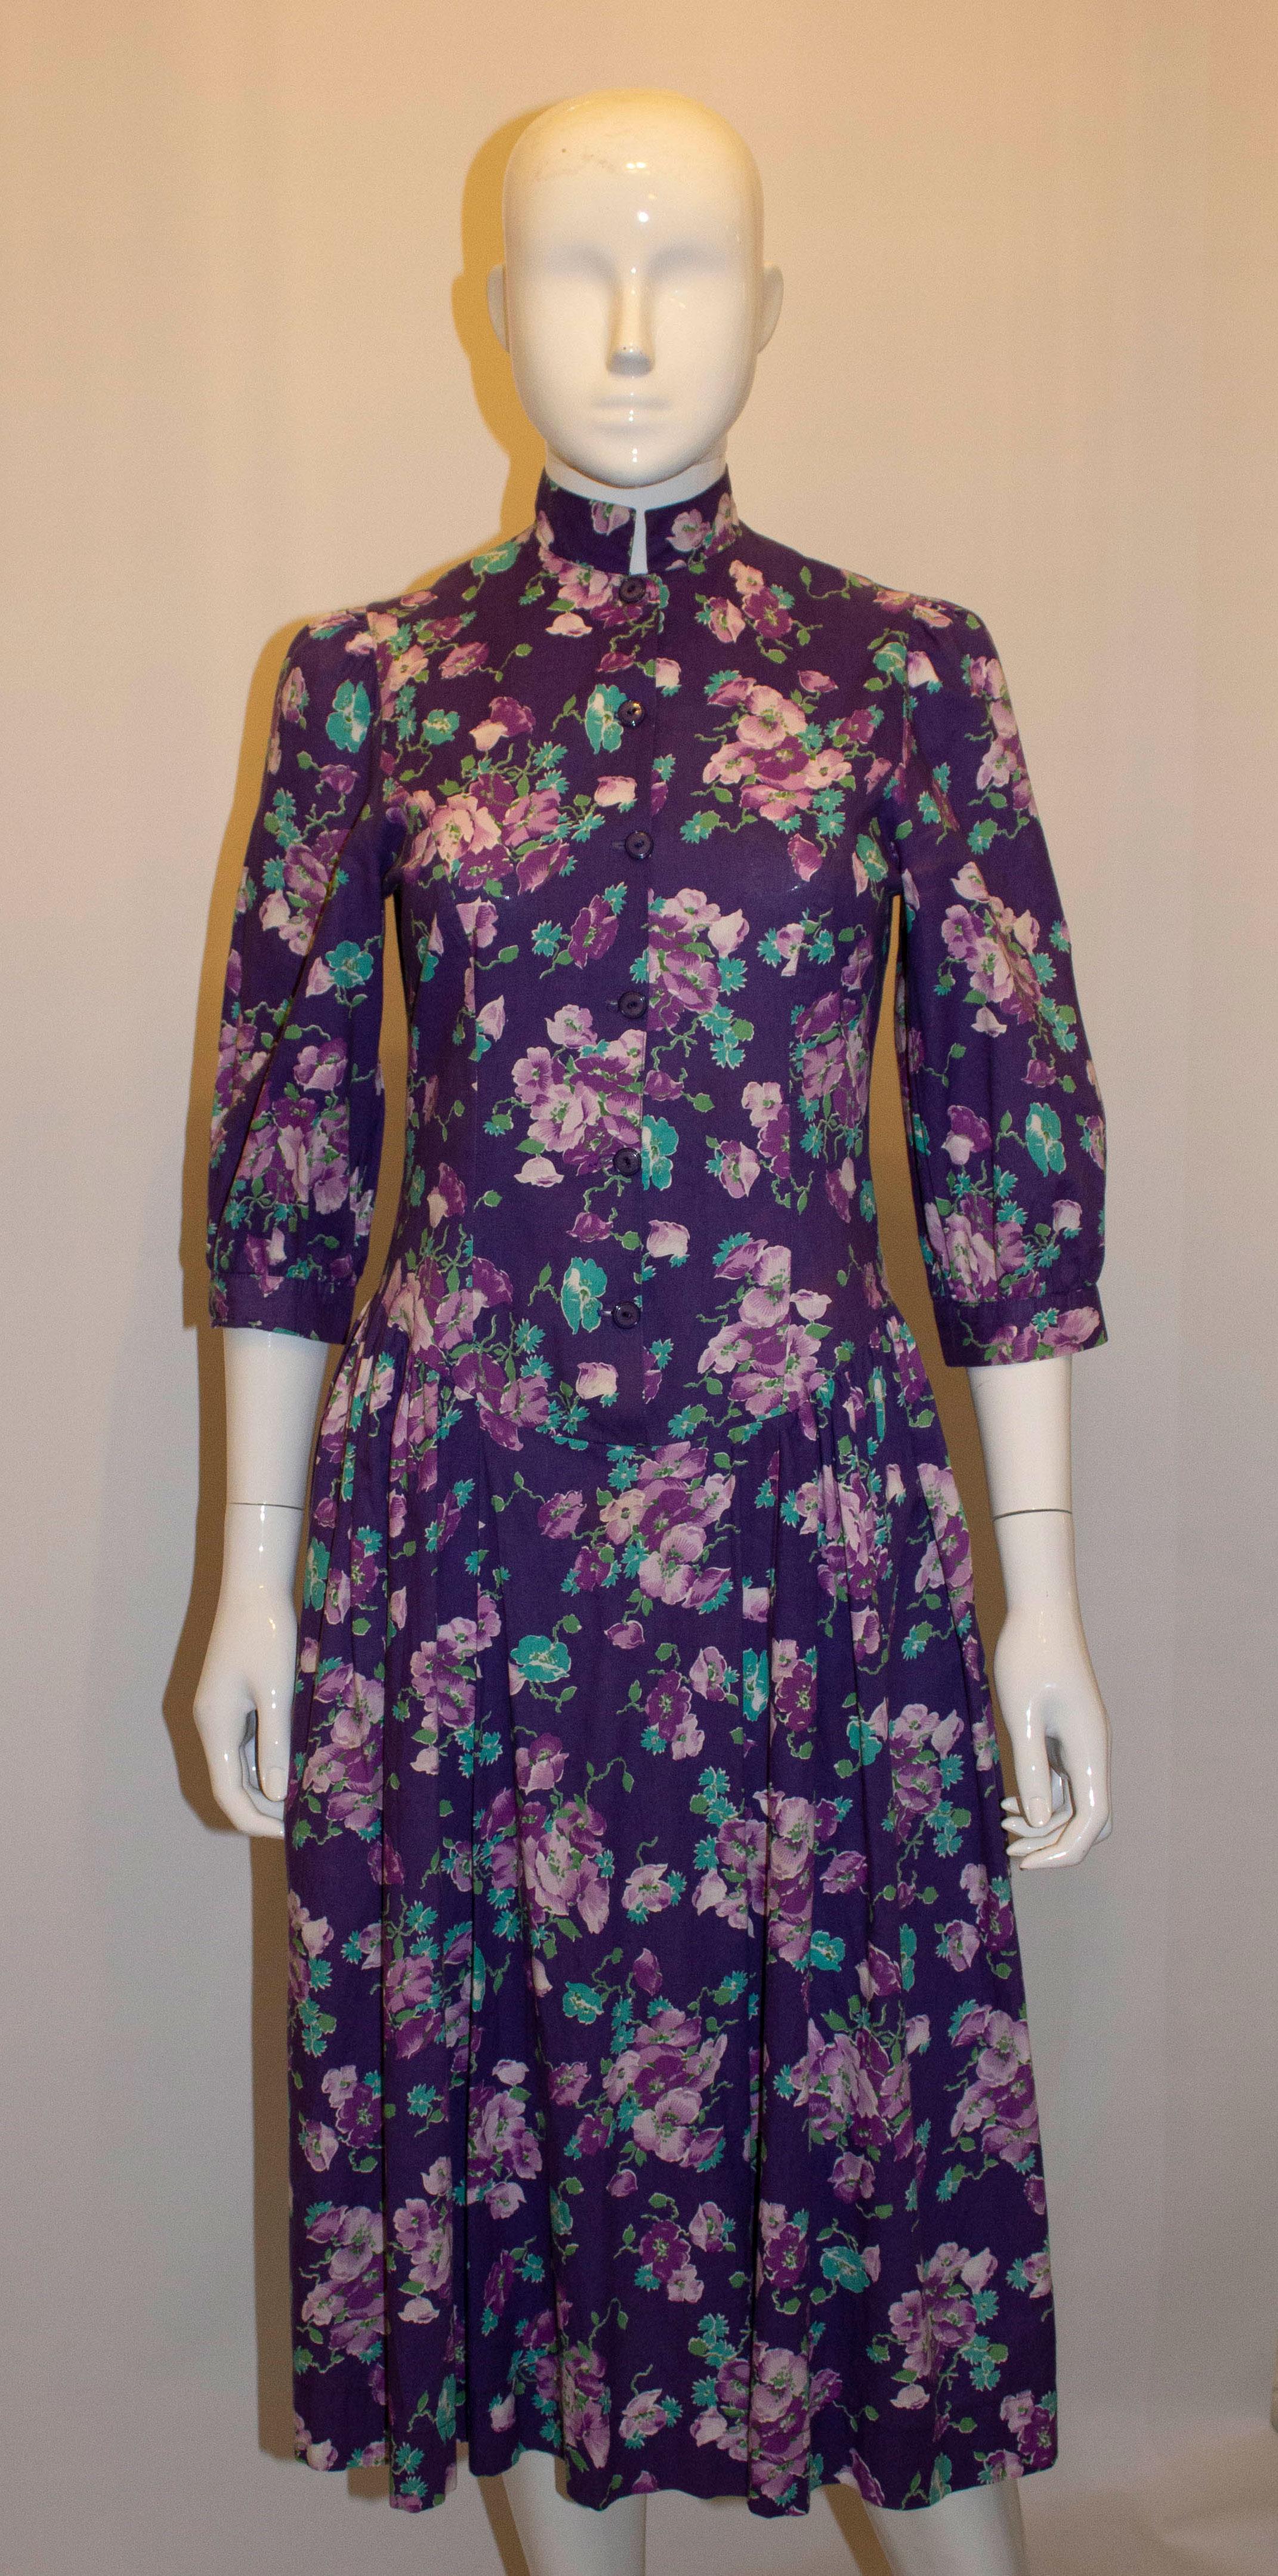 Vintage Laura Ashley Floral Cotton Dress In Good Condition For Sale In London, GB